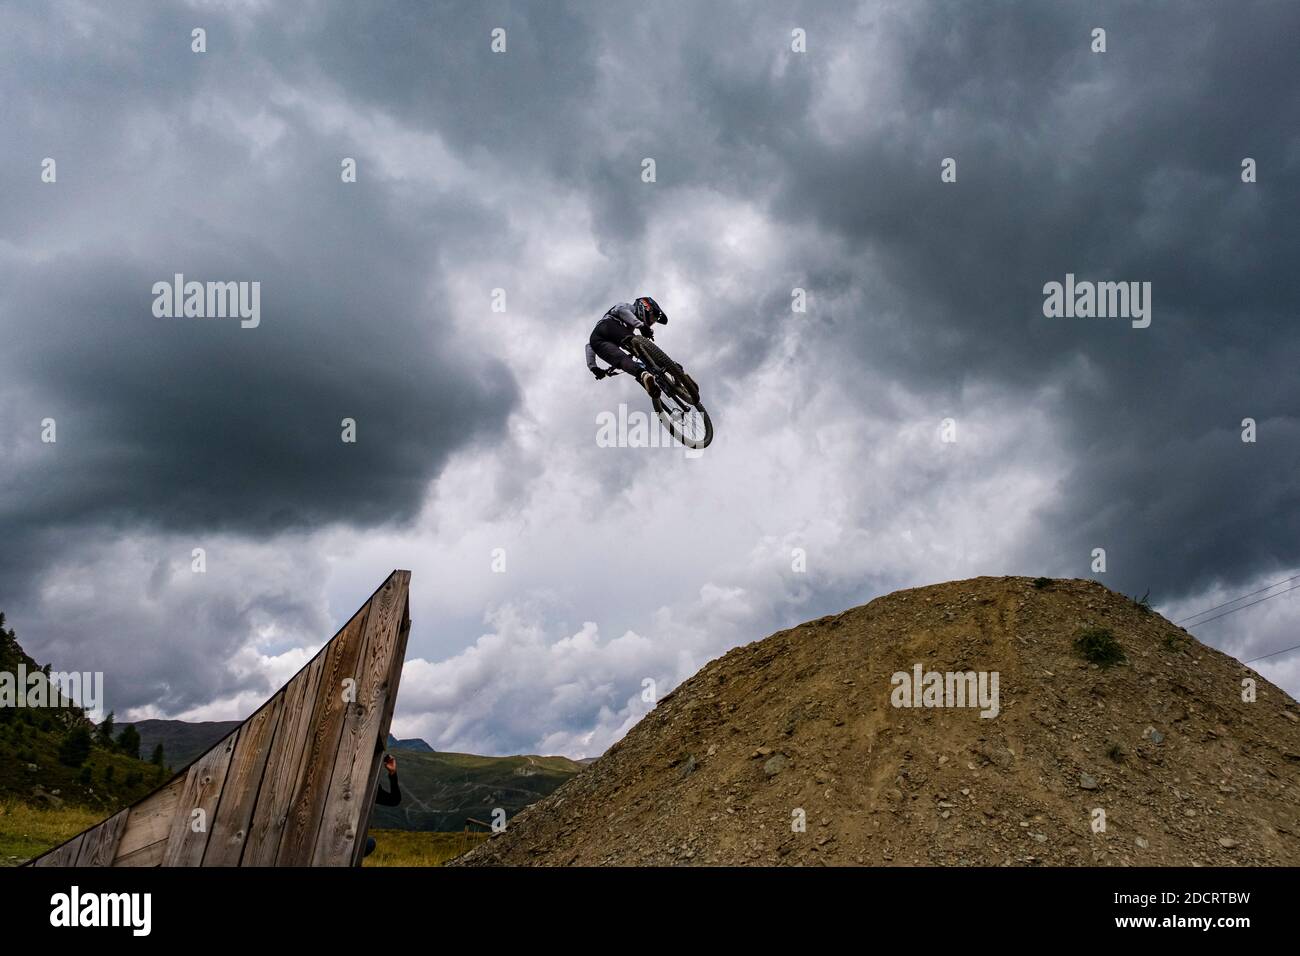 A downhill cyclist is jumping in the Mottolino Bike Park, surrounding  mountains of Livigno in the distance Stock Photo - Alamy